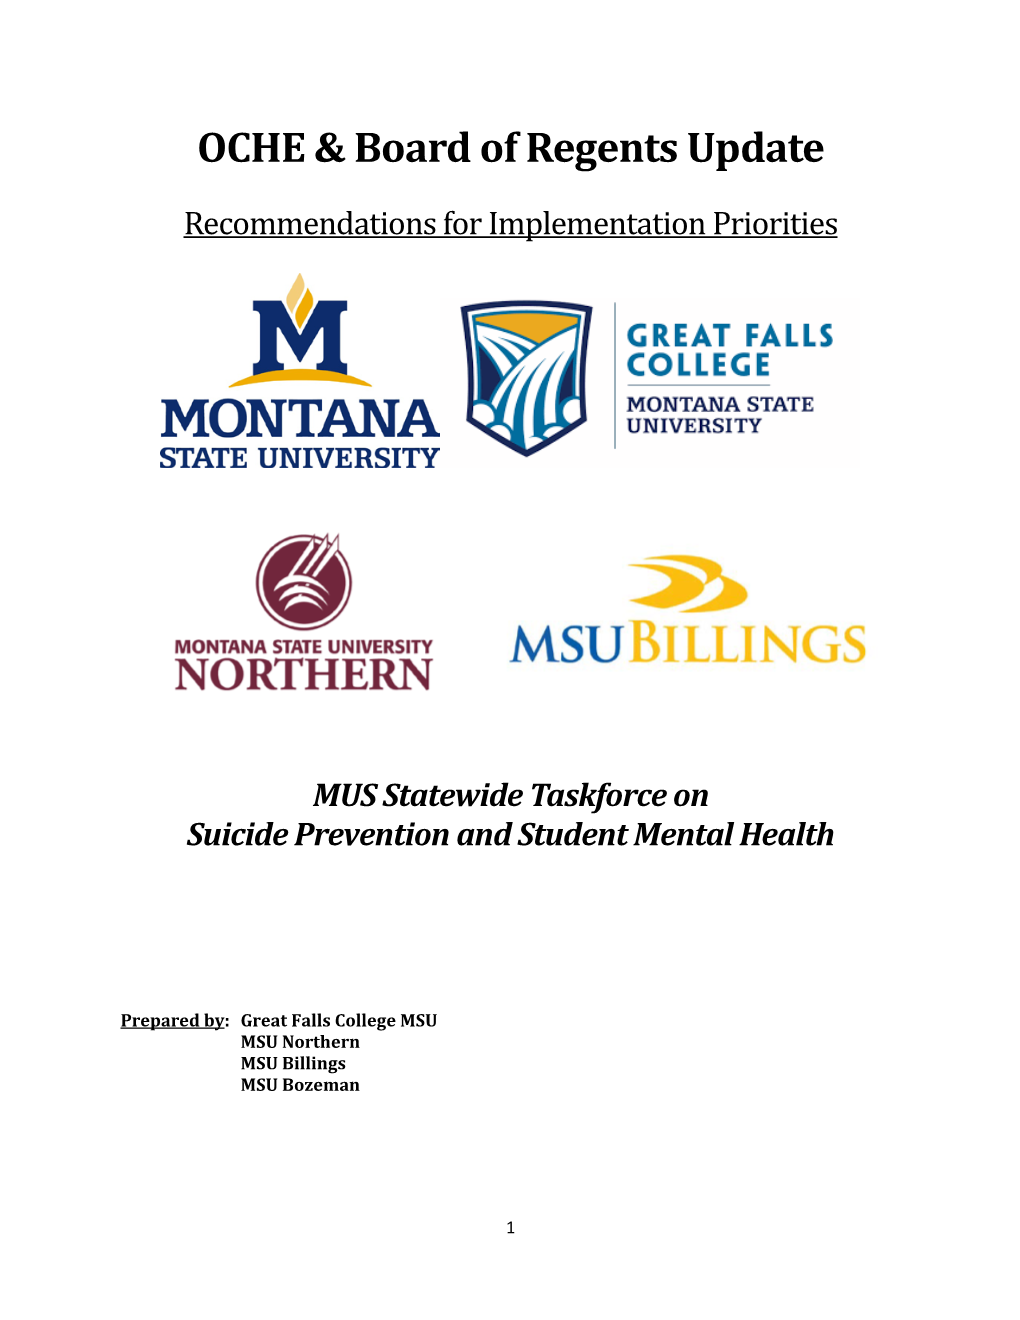 MUS Statewide Taskforce on Suicide Prevention and Student Mental Health